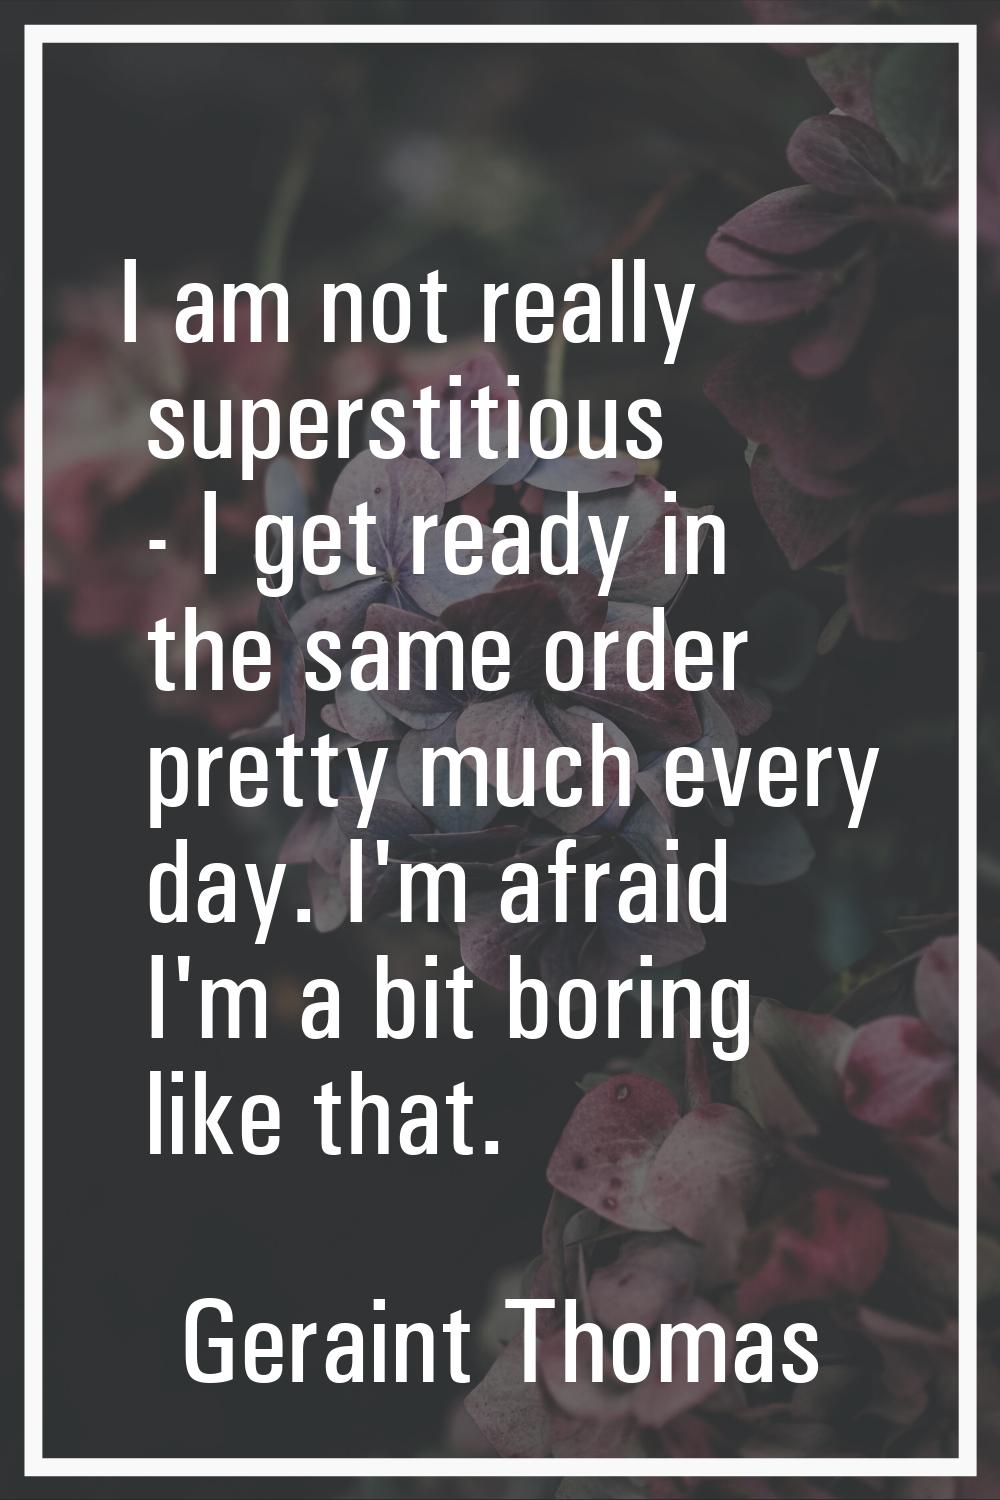 I am not really superstitious - I get ready in the same order pretty much every day. I'm afraid I'm